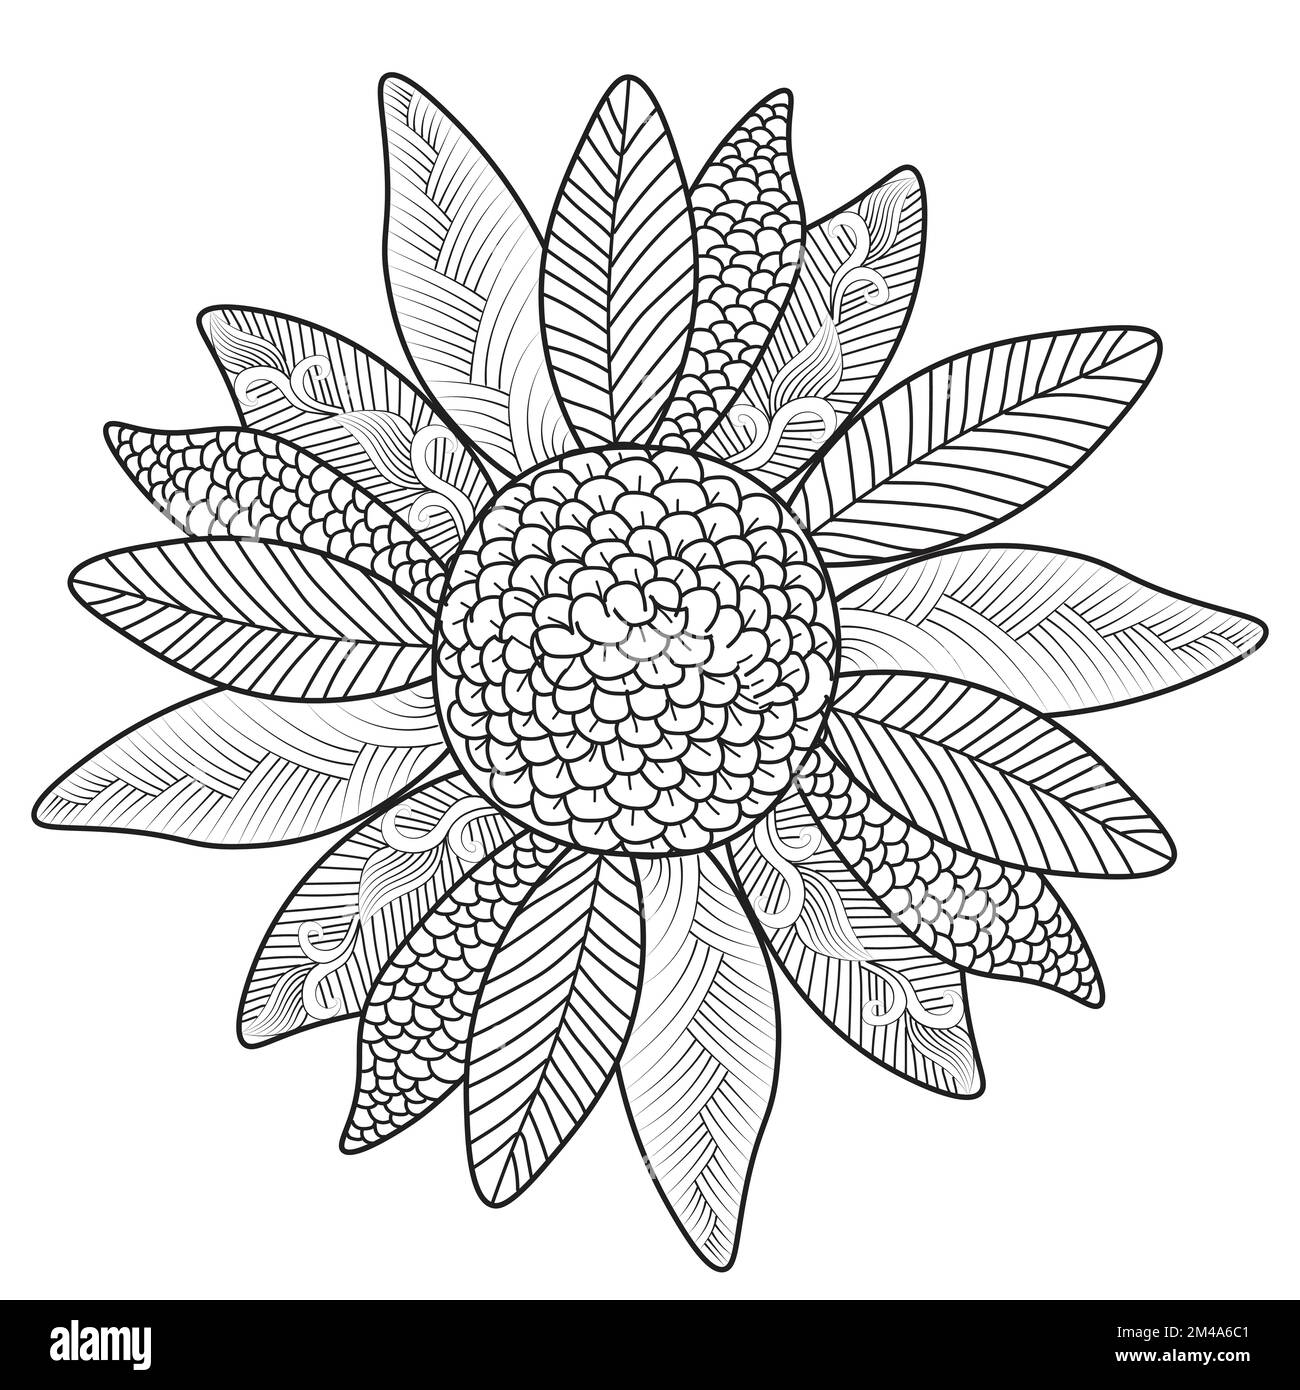 sunflower of zentangle coloring page with decorative flower background design illustration Stock Vector